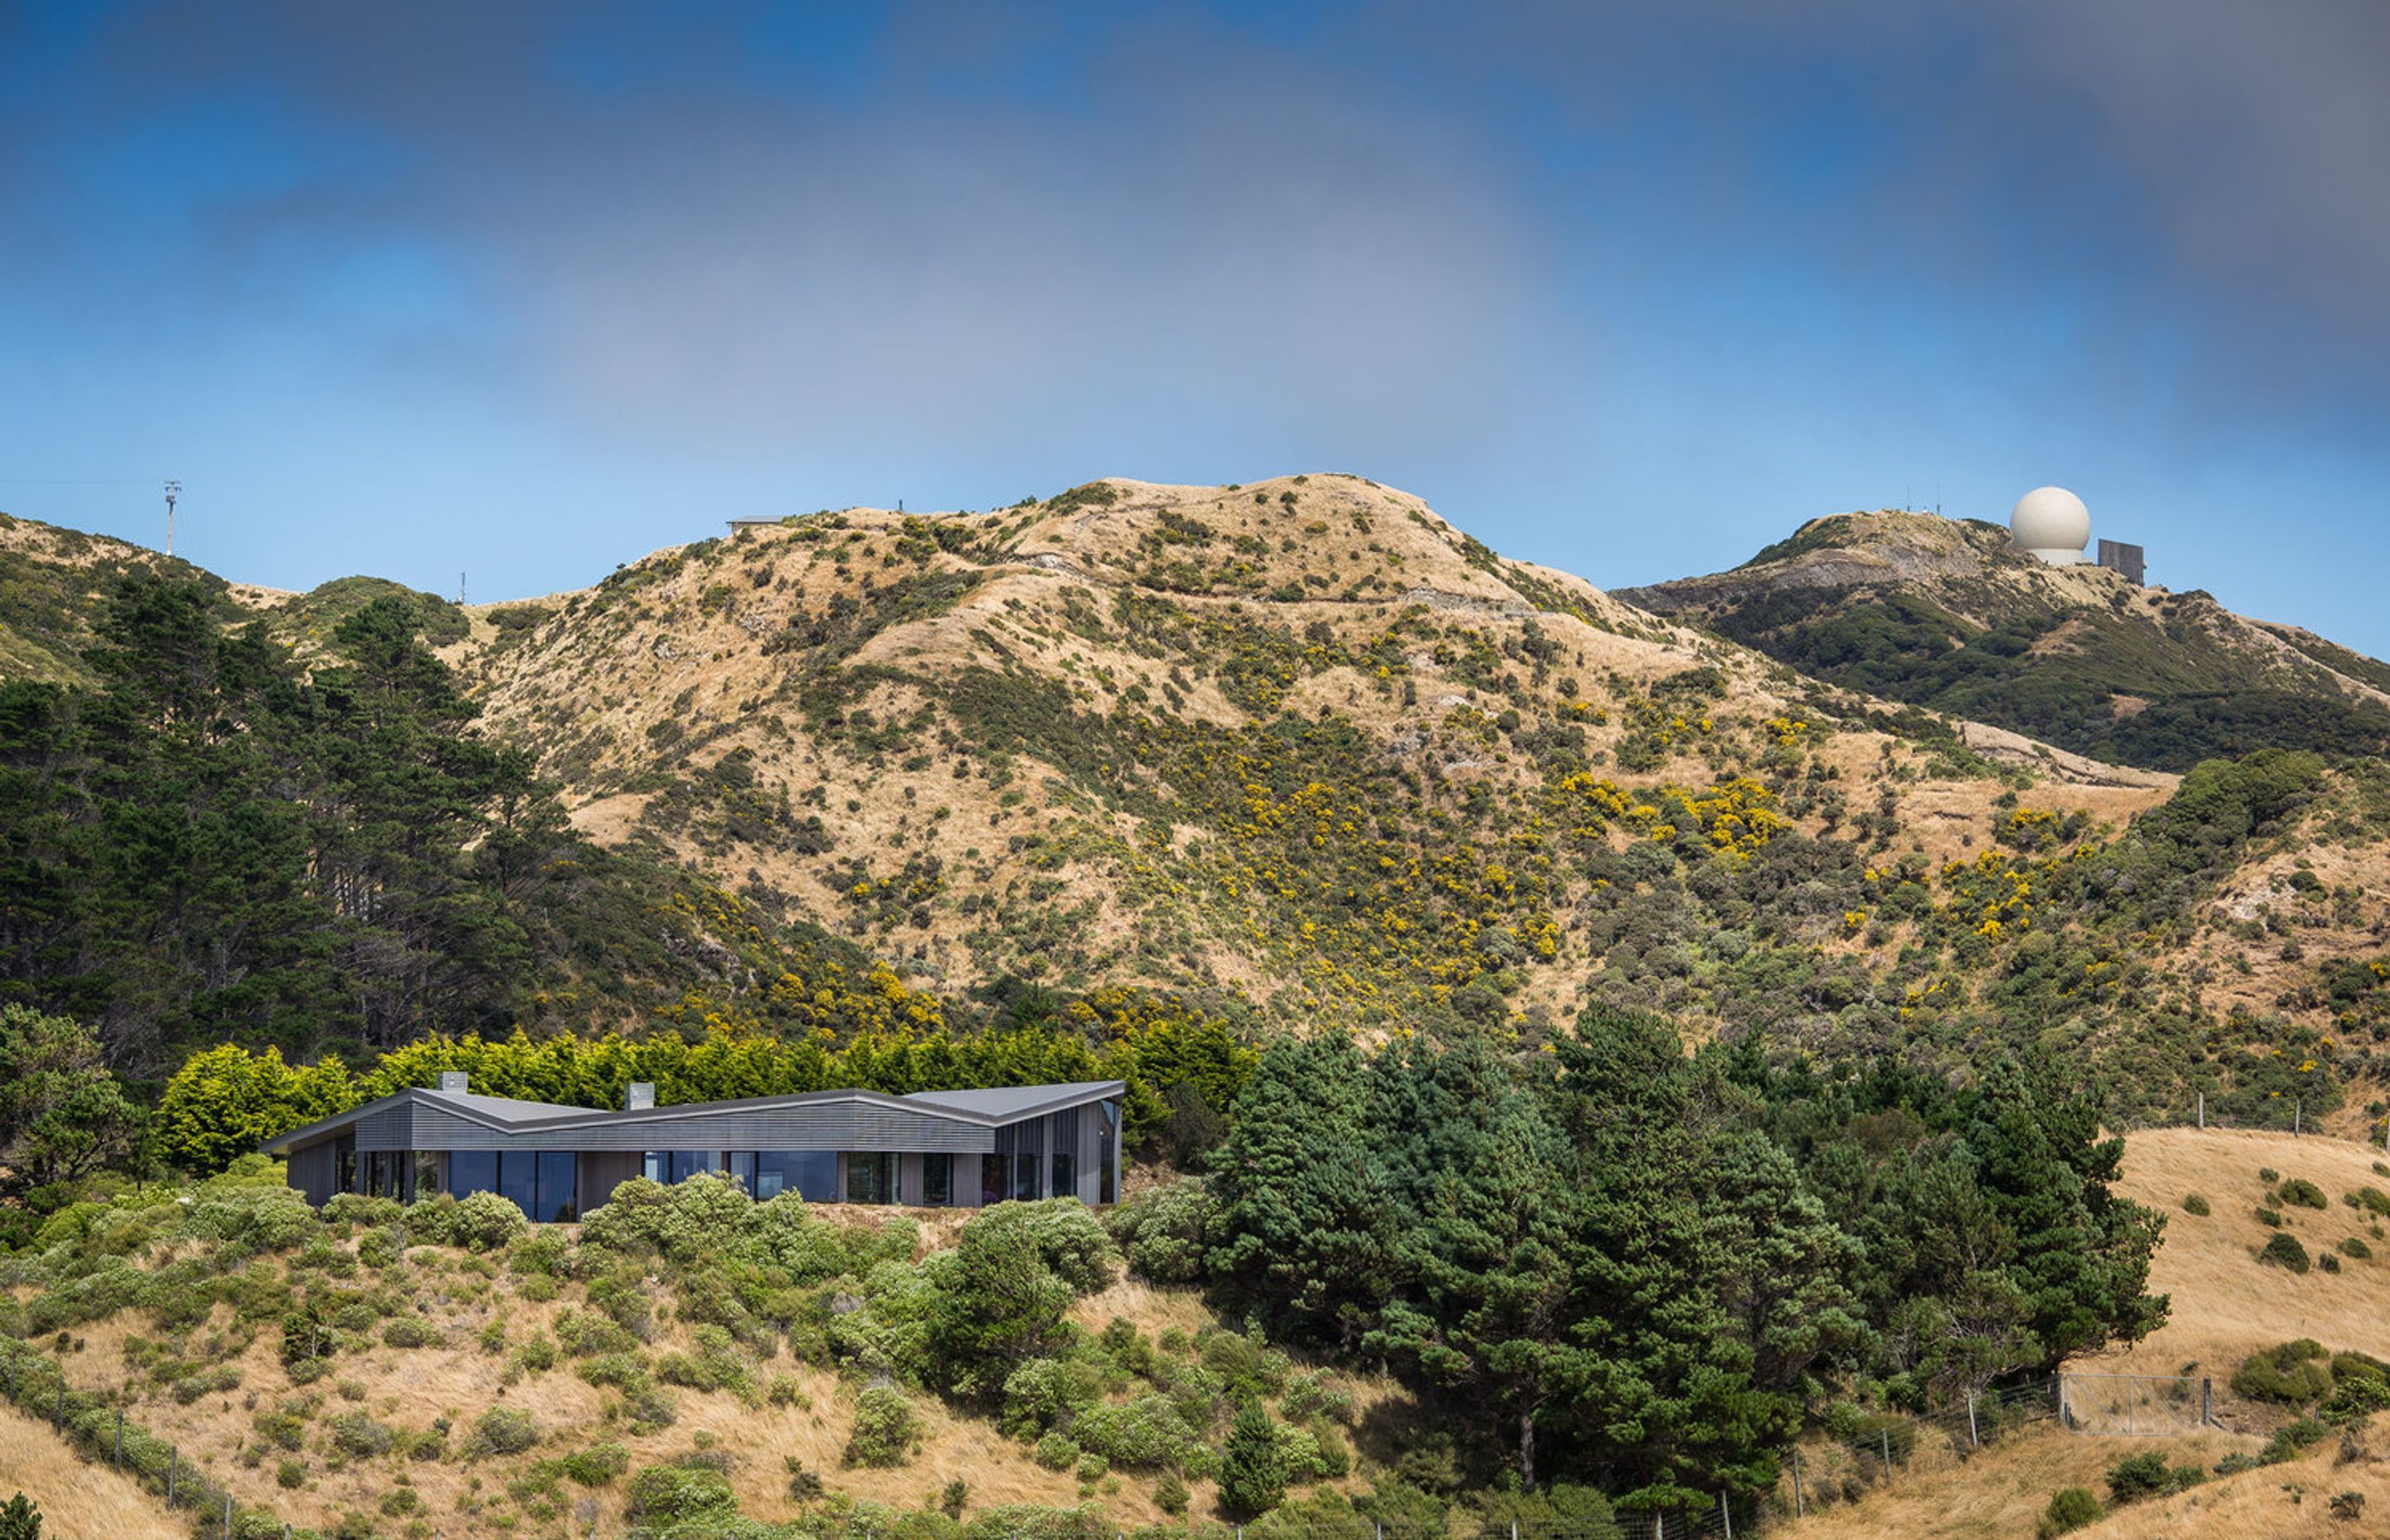 This contemporary rural house tops off a hill excavated a long time ago, completing its form. Its low-slung form is "slightly undulating – like the rolls of the neighbouring hills."